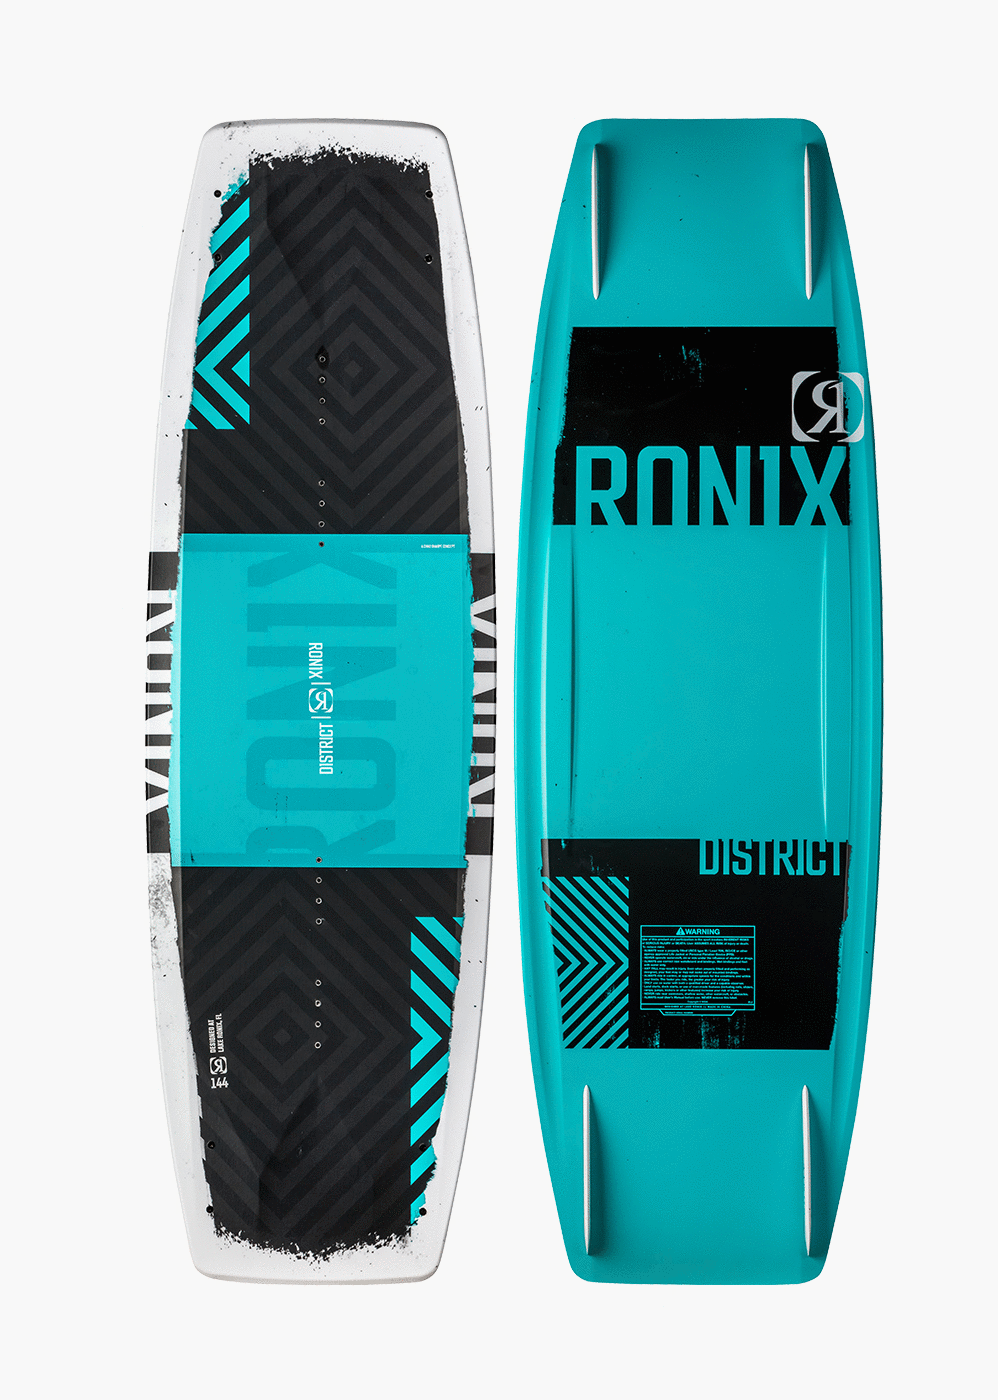 Men's Women's and Children's Wakeboards | Ronix Wakeboards | Ronix 